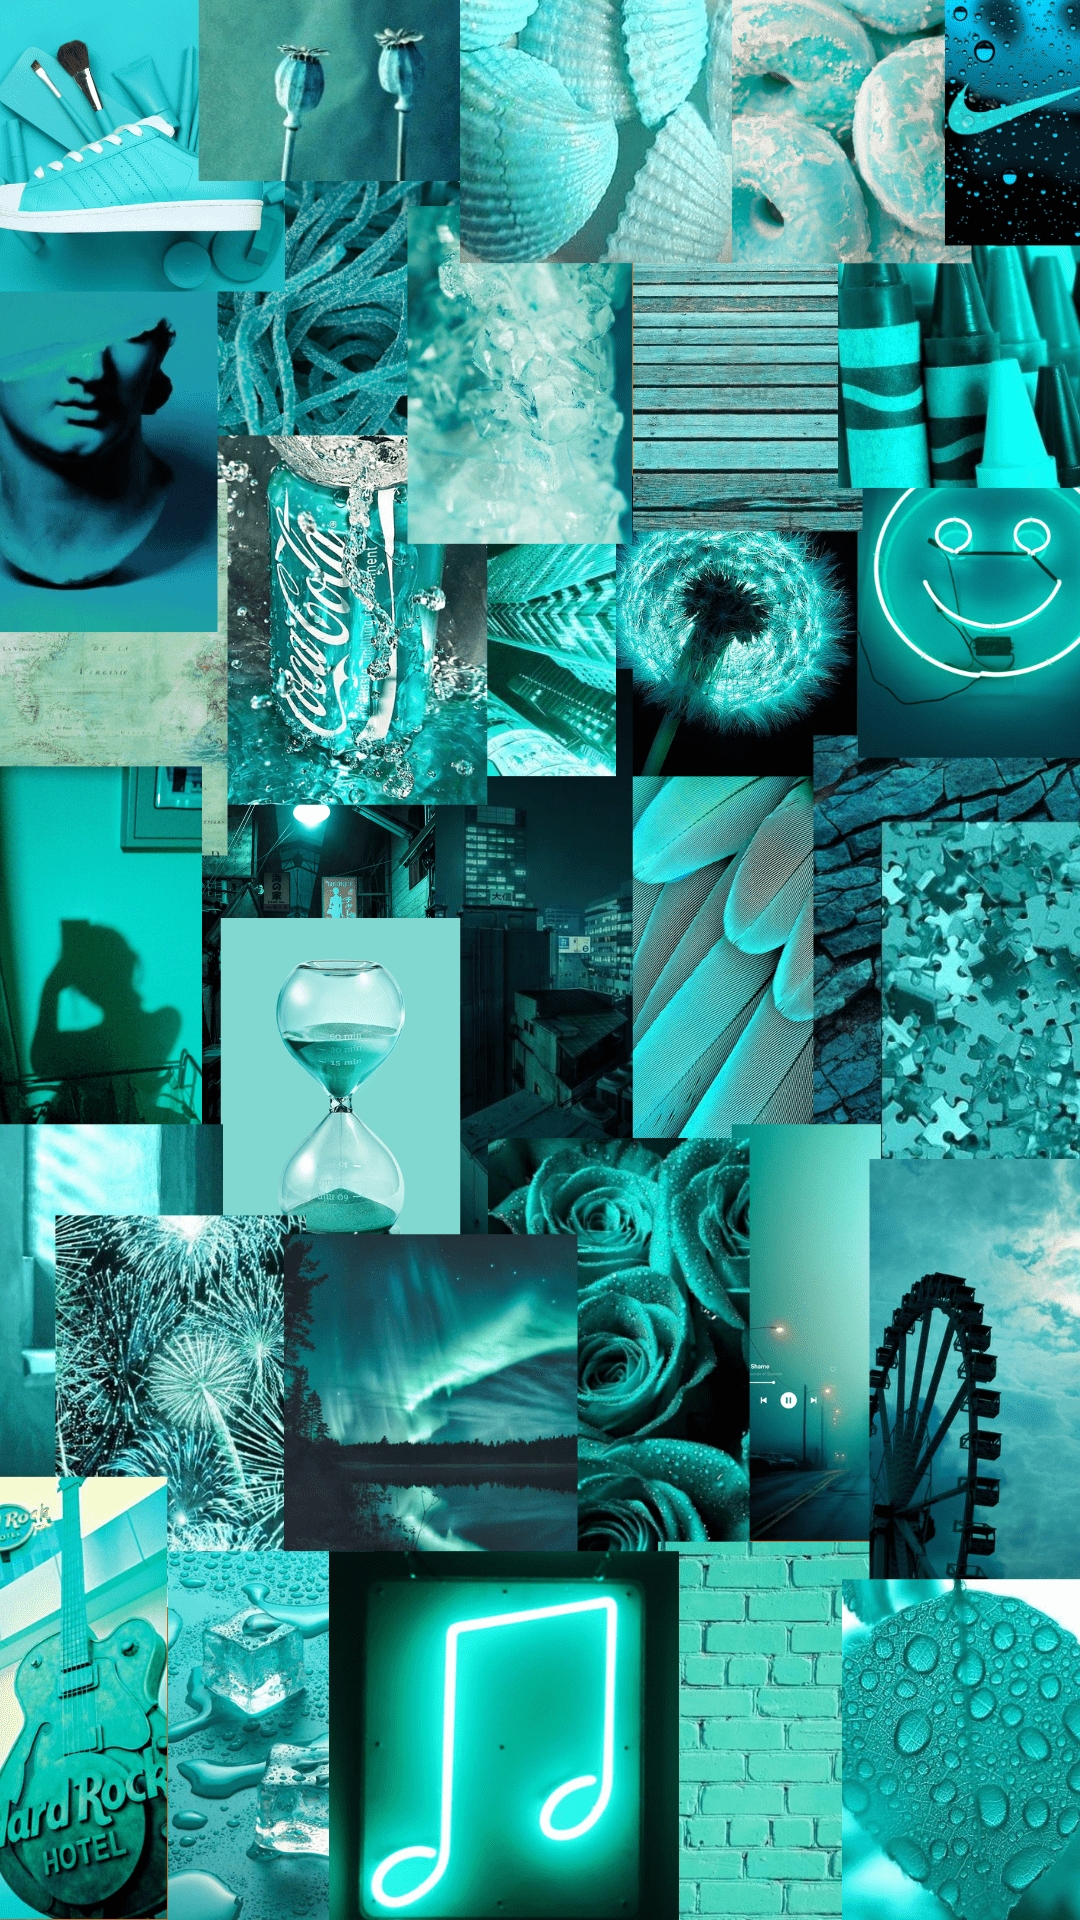 Aesthetic background teal color. - Teal, turquoise